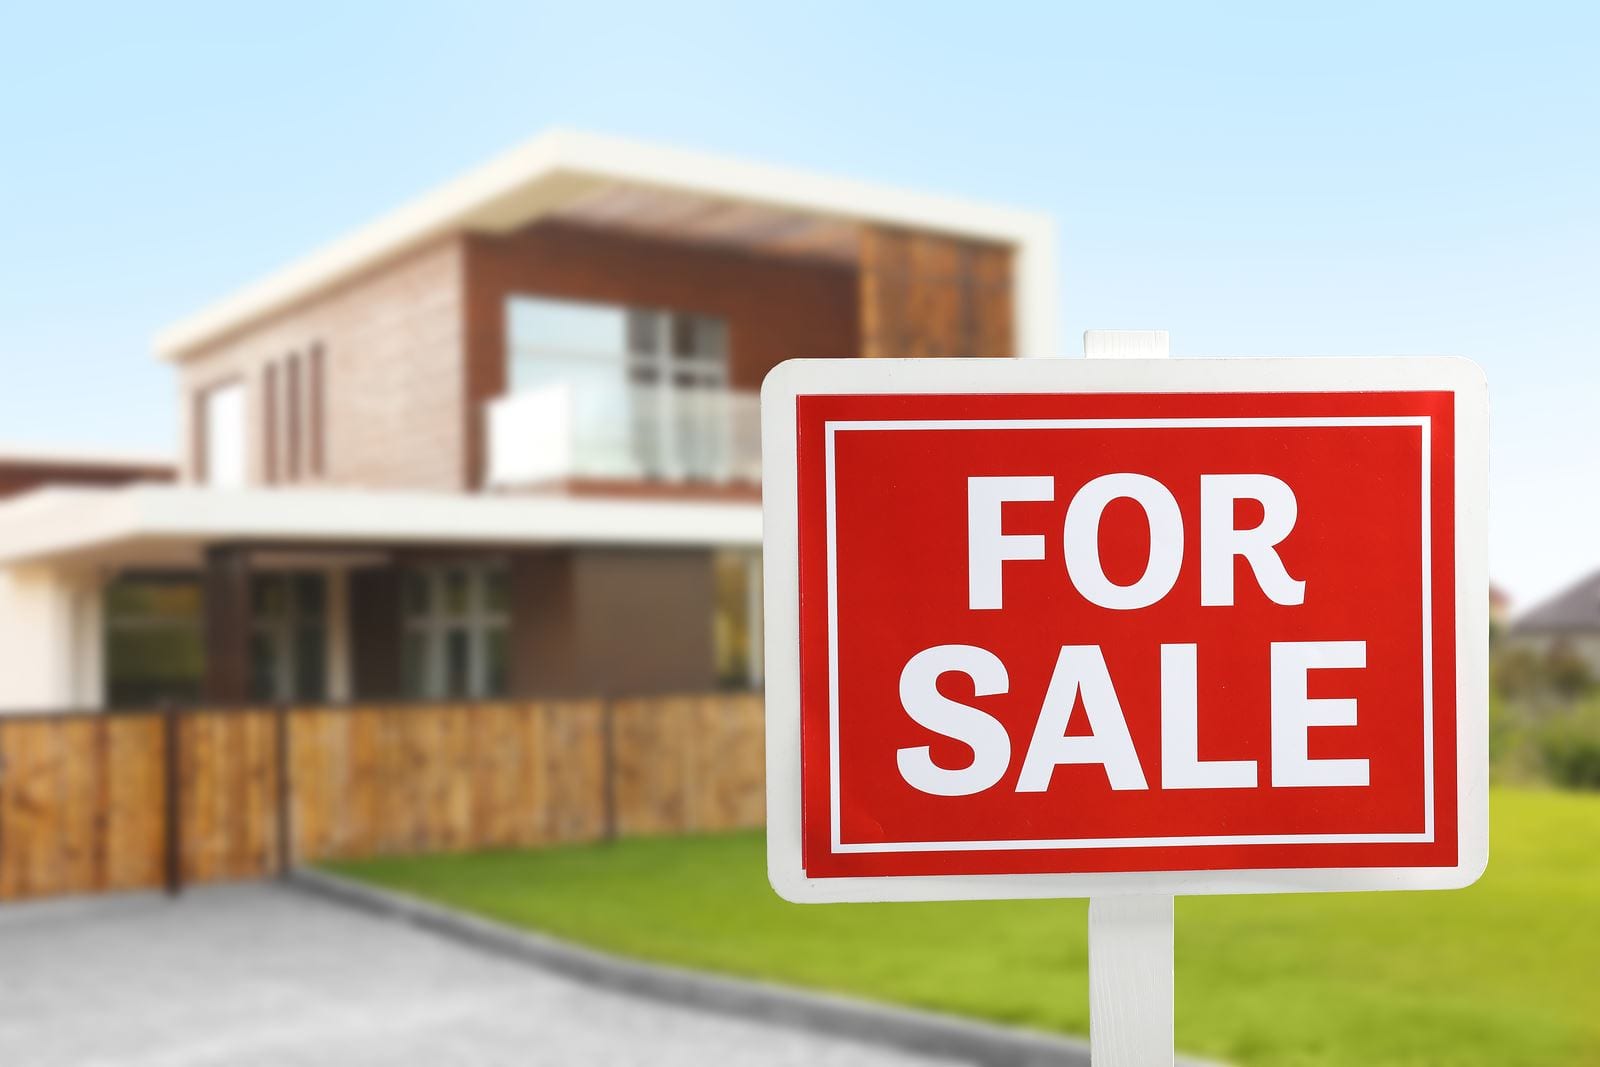 How to Find Investment Property for Sale Near Me - Mashvisor